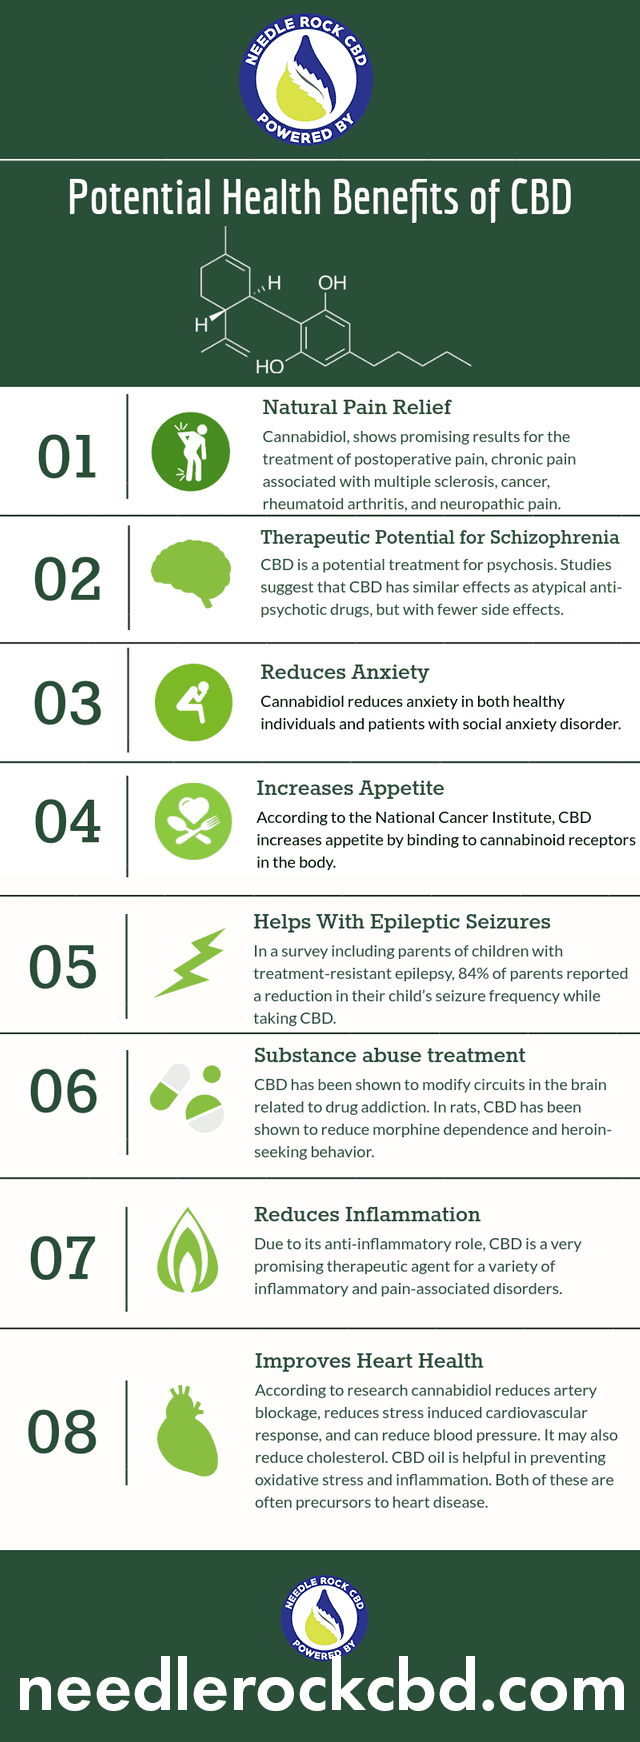 cbd infographic - What's the Best Time of the Day to Take CBD Oil? (Answered - 2019)